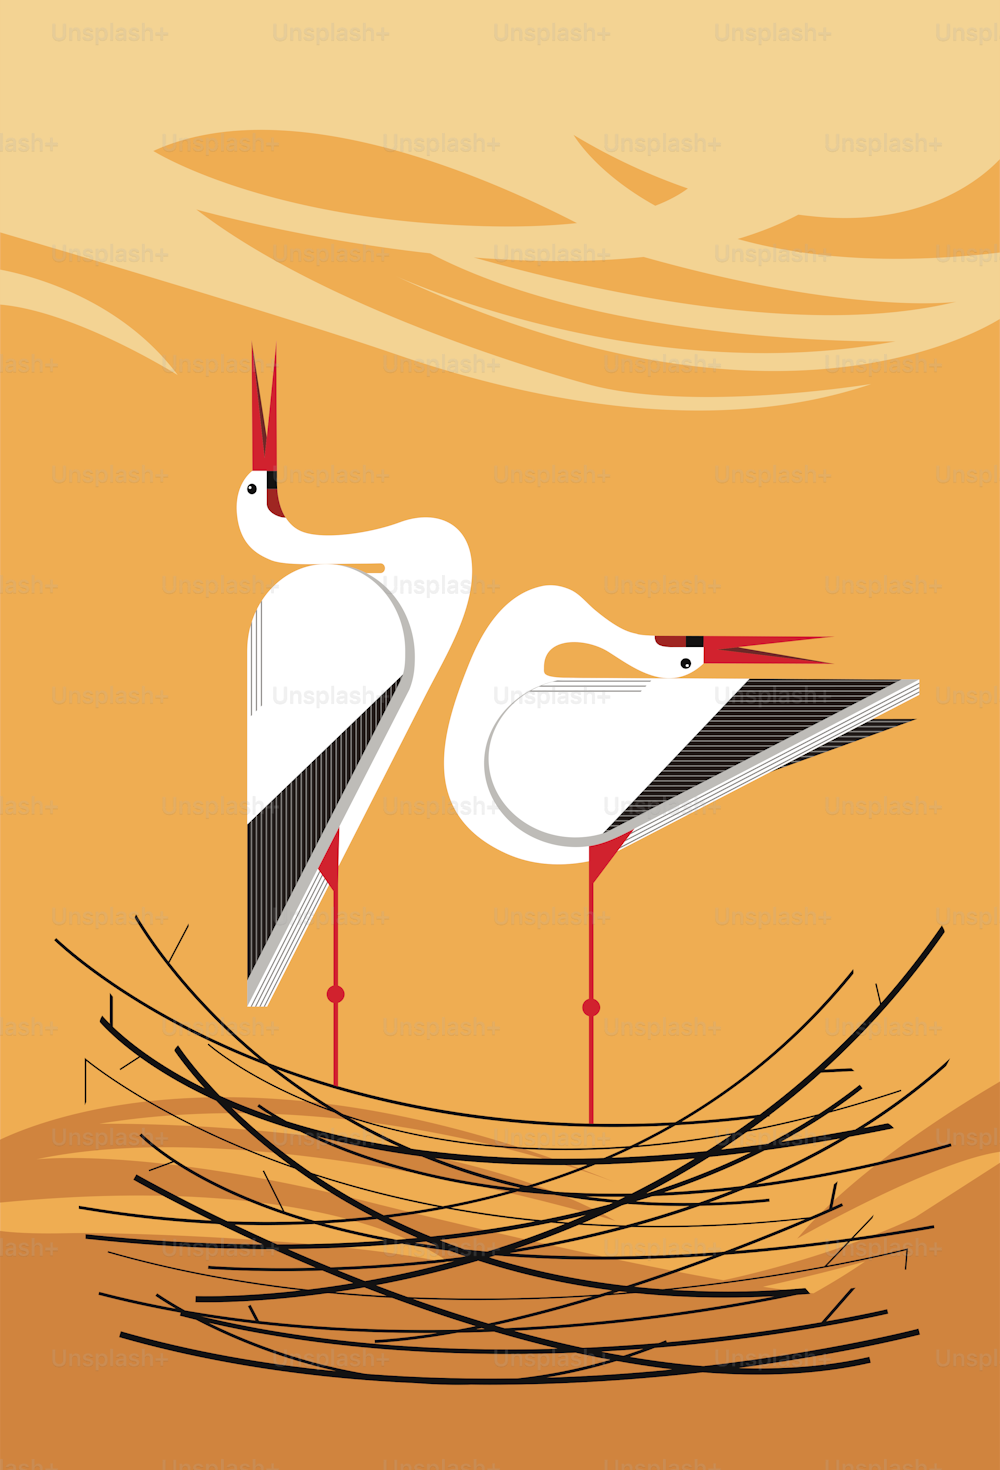 Love song of storks in the nest, minimalistic image